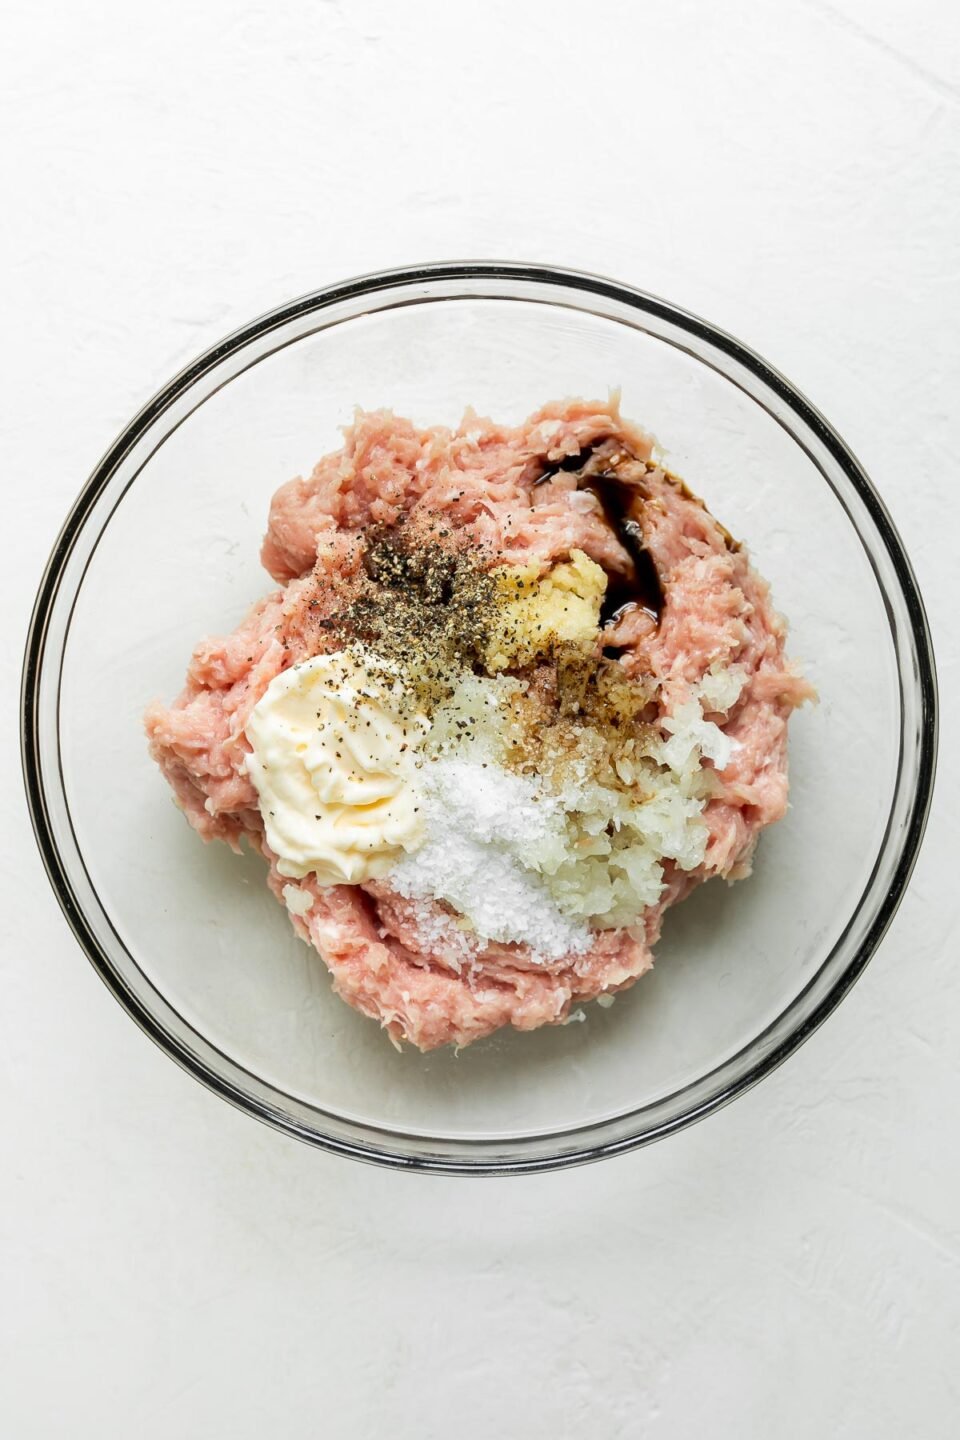 Ground chicken, yellow onion, garlic, mayonnaise, and Worcestershire sauce inside of a clear glass mixing bowl atop a creamy white textured surface.